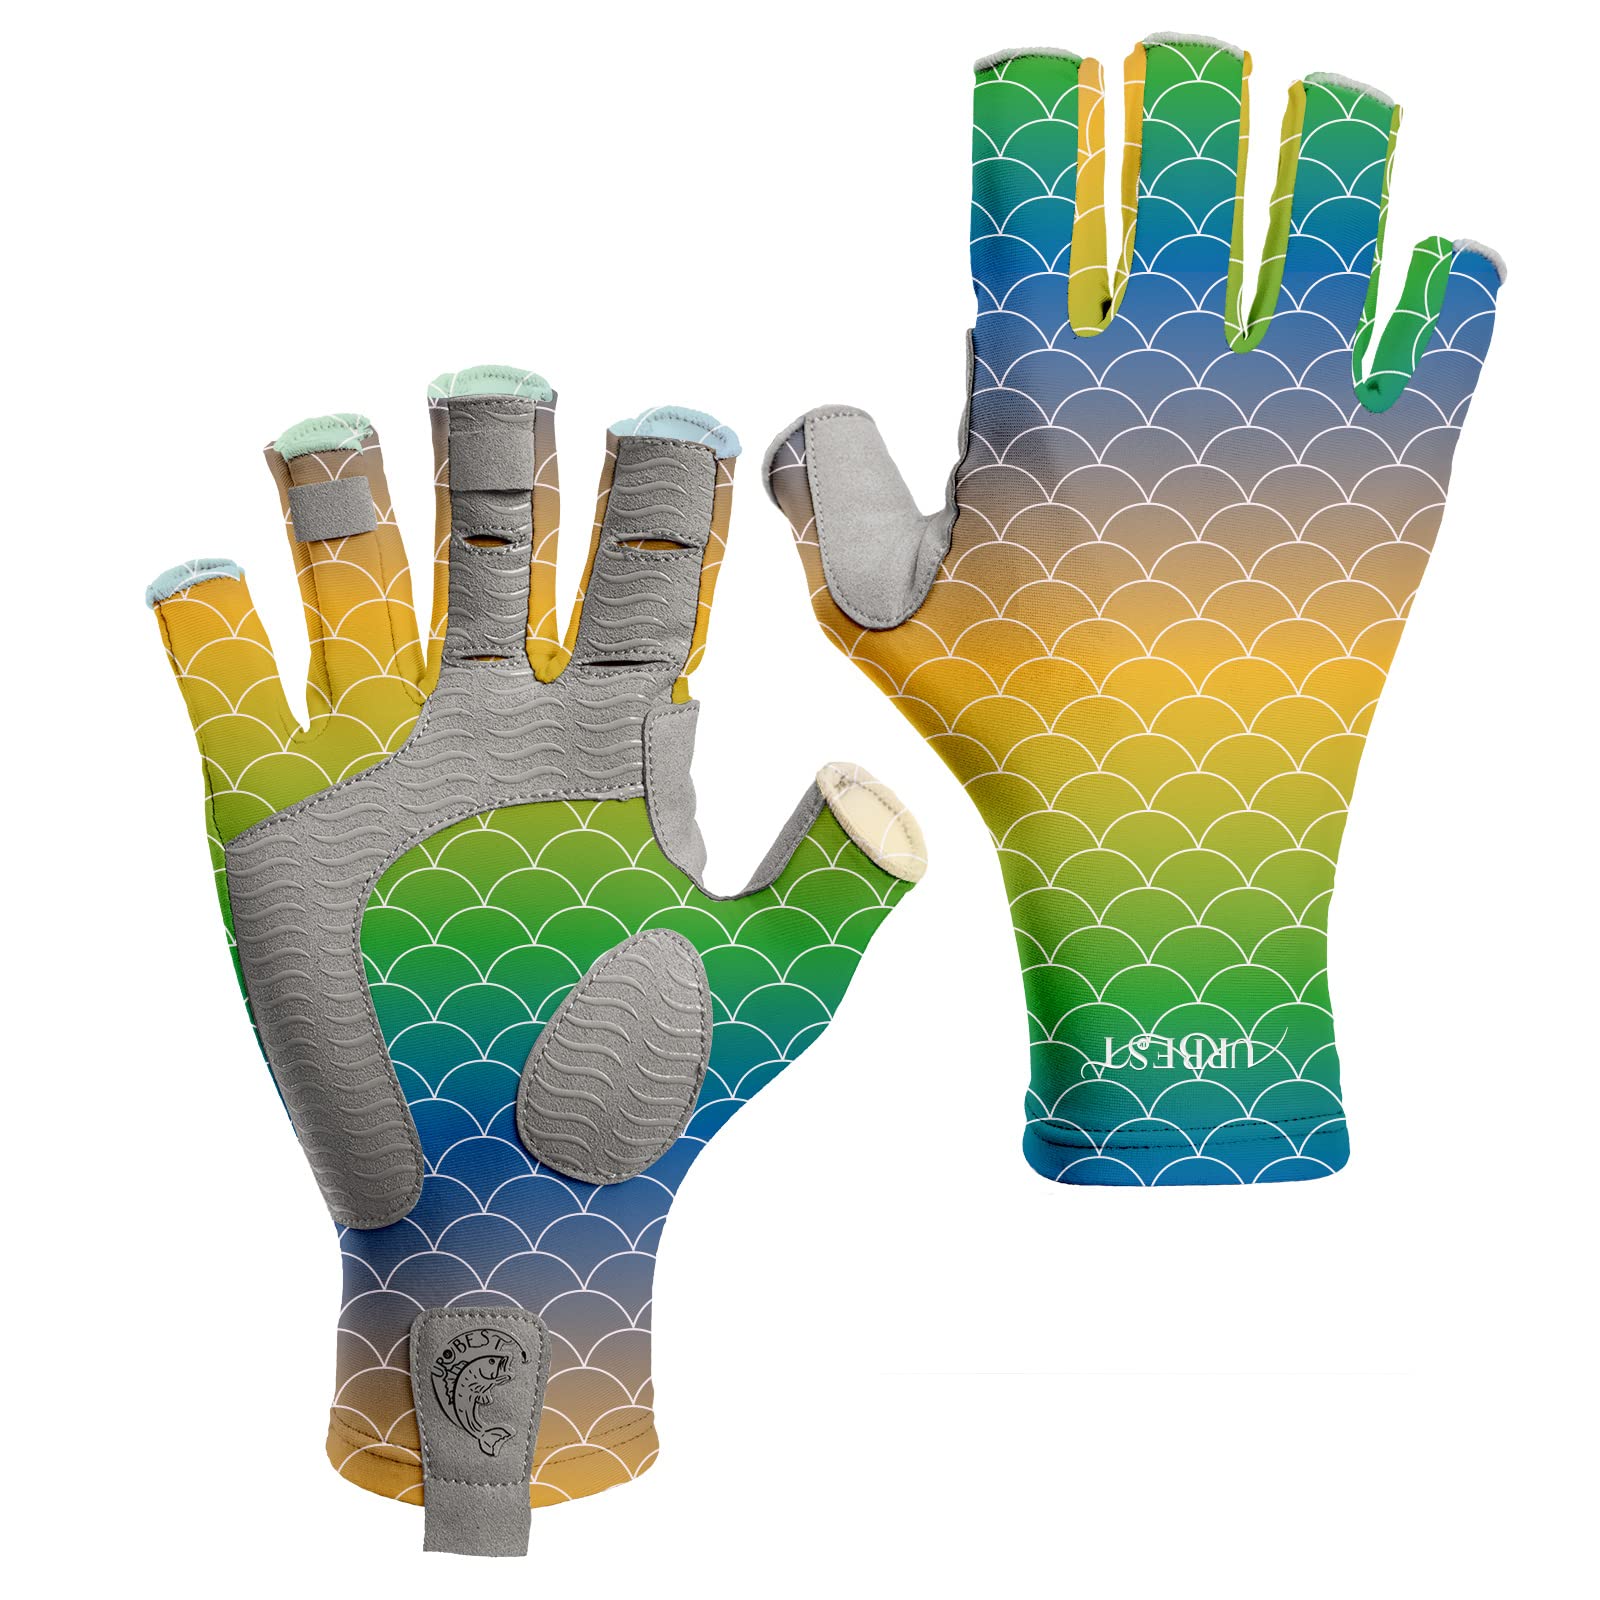 Fishing Gloves for Men and Women, Half Finger Gloves for Rowing, Sailing,  Hiking, and Kayaking, Quick